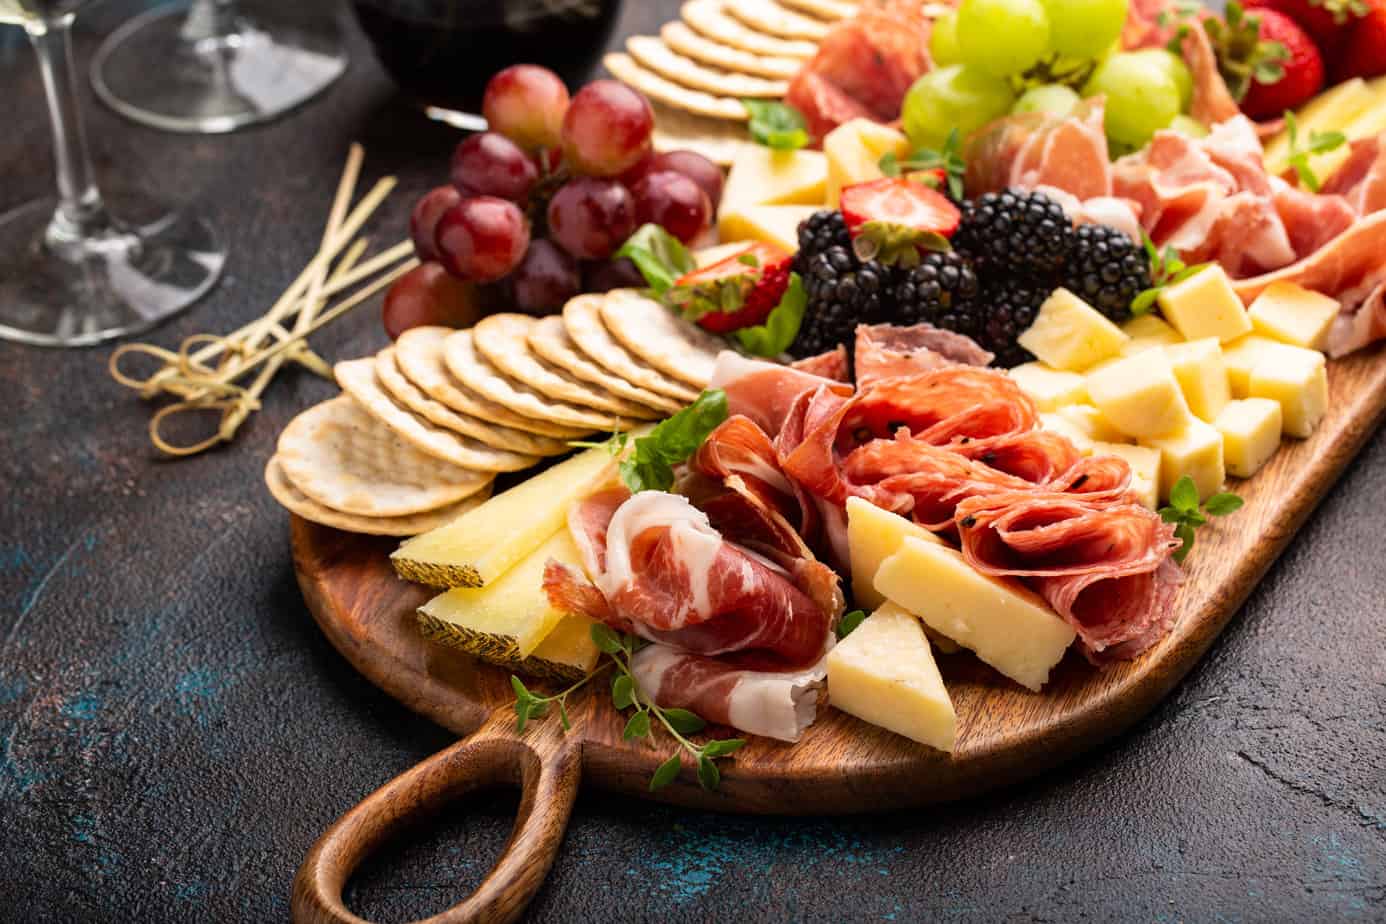 Charcuterie board filled with meats, cheeses and fruits with wine glasses next to it on a black counter 